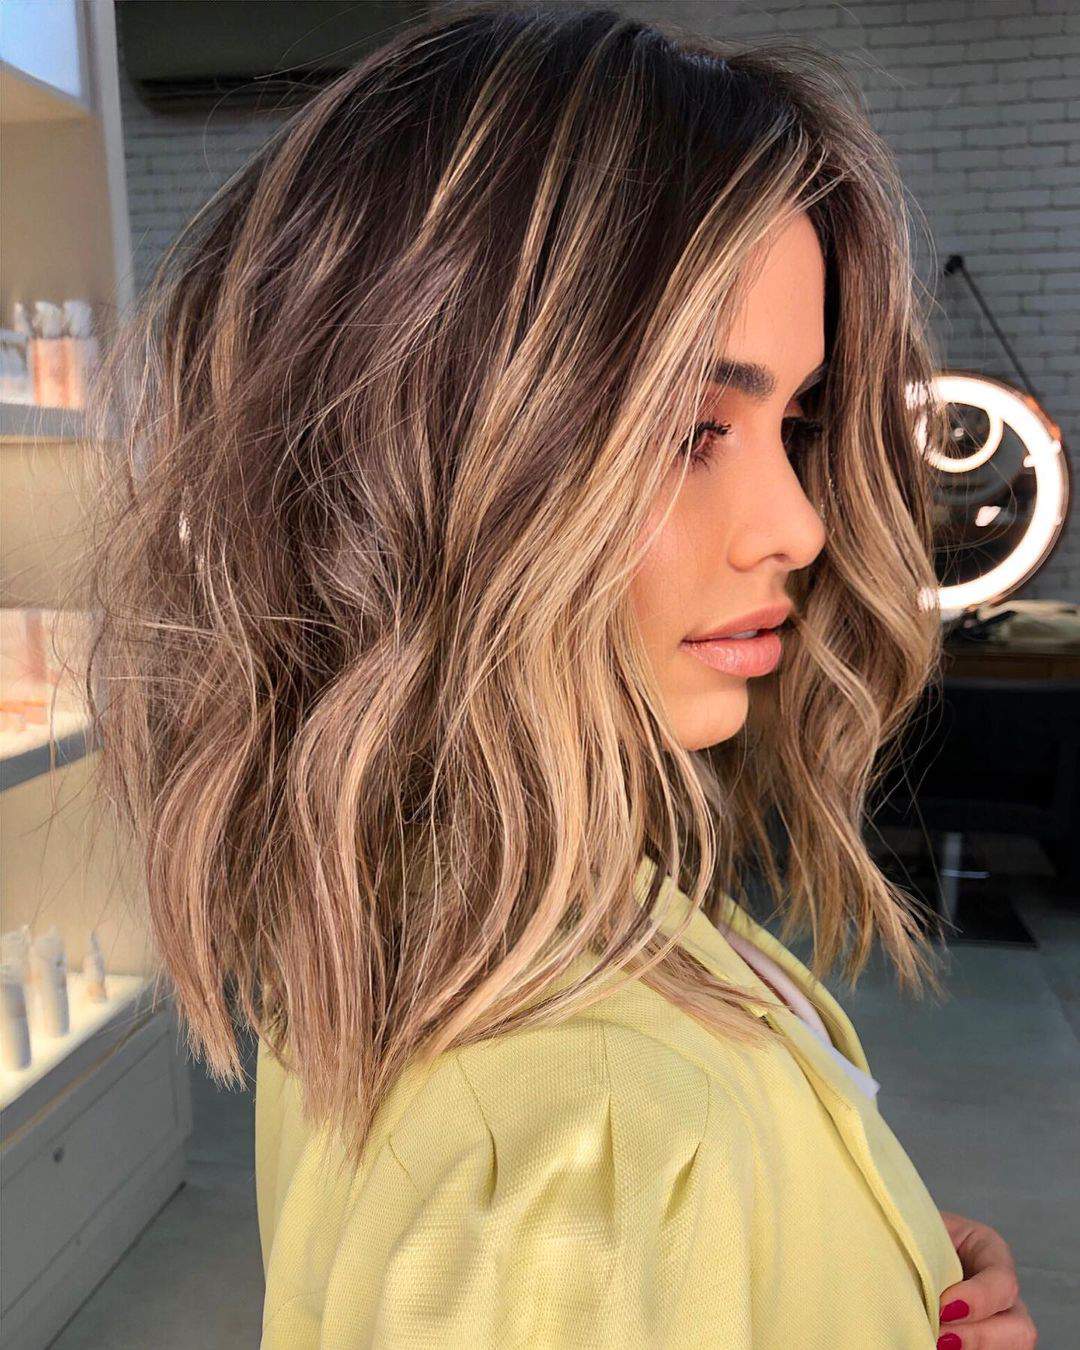 100+ Trendy Hairstyle Ideas For Women To Try In 2021 images 34